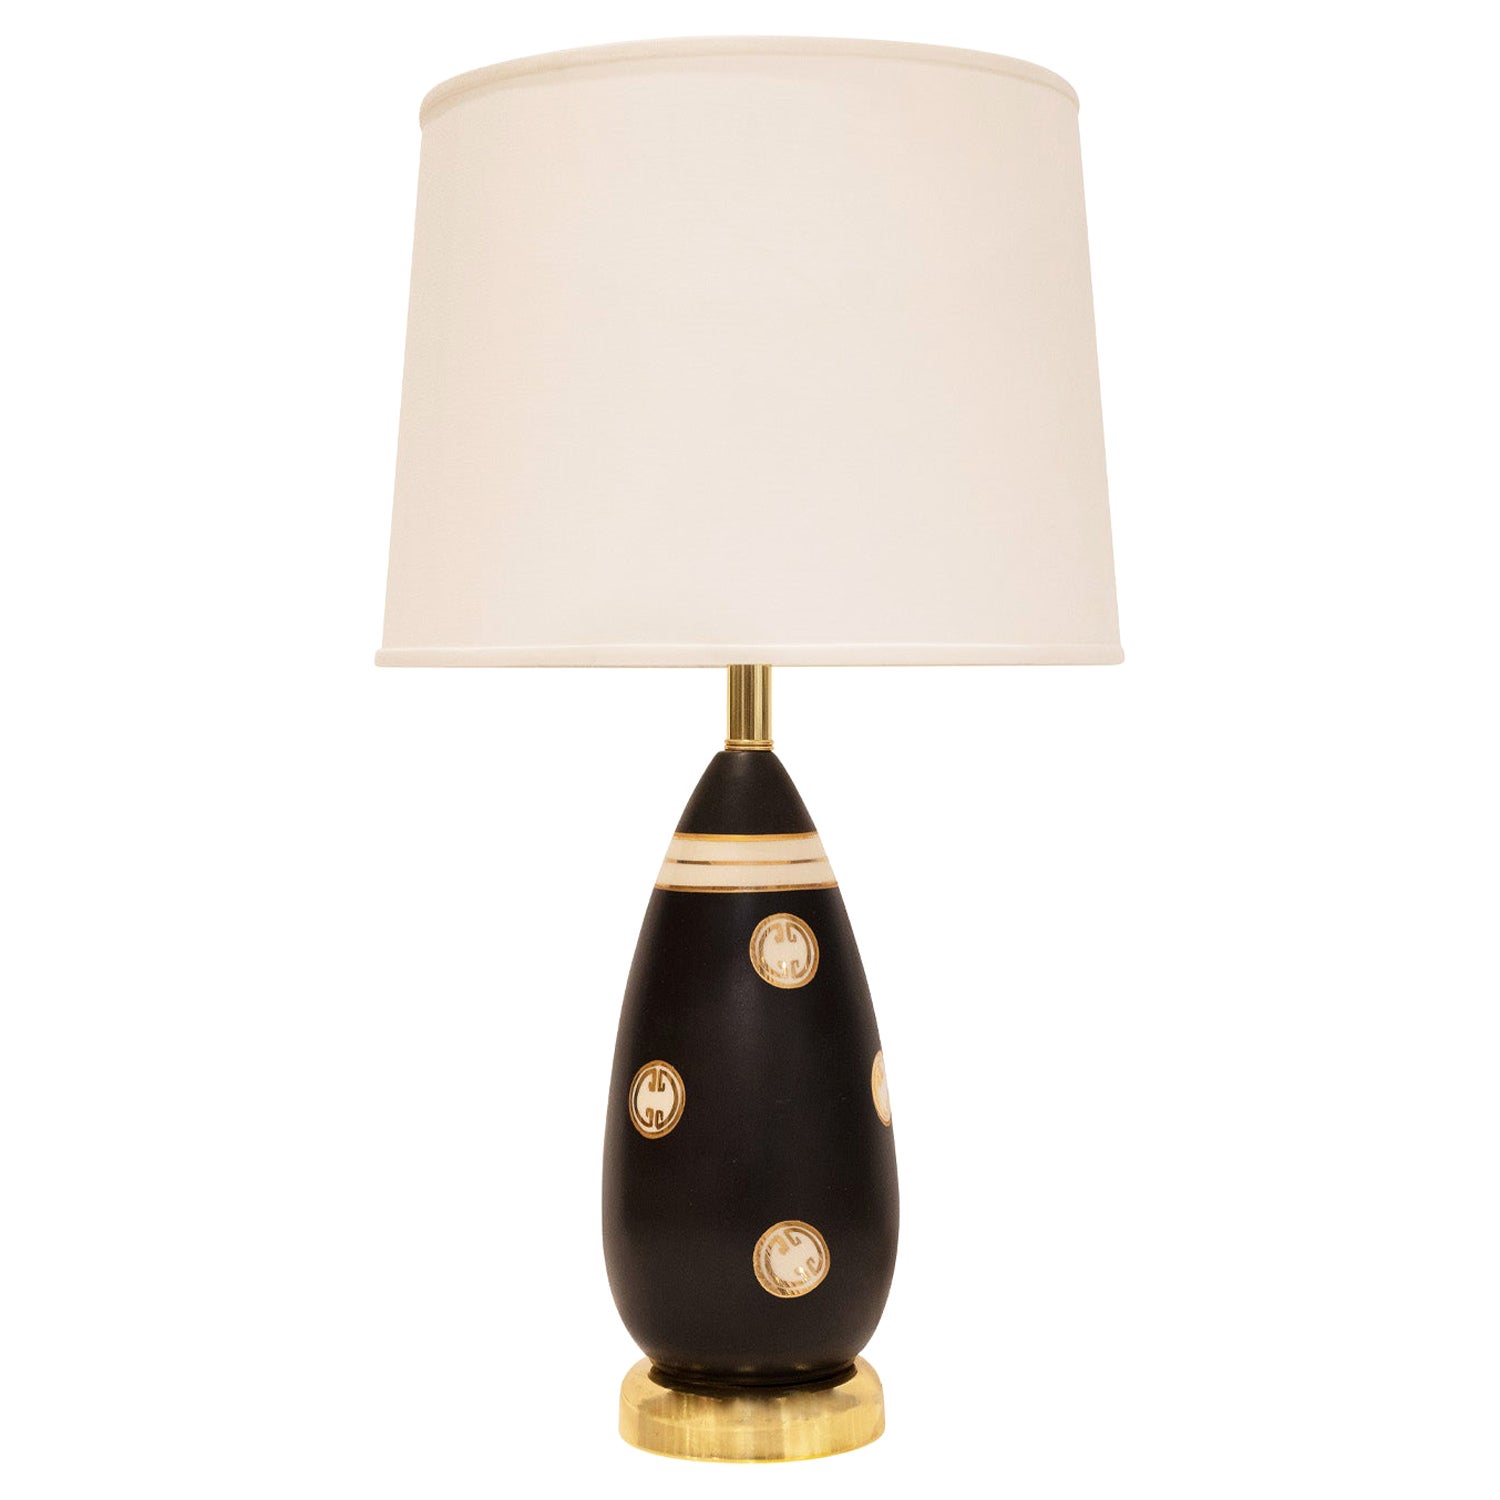 Chic Artisan Porcelain Table Lamp with Gold Medallions, 1960s For Sale